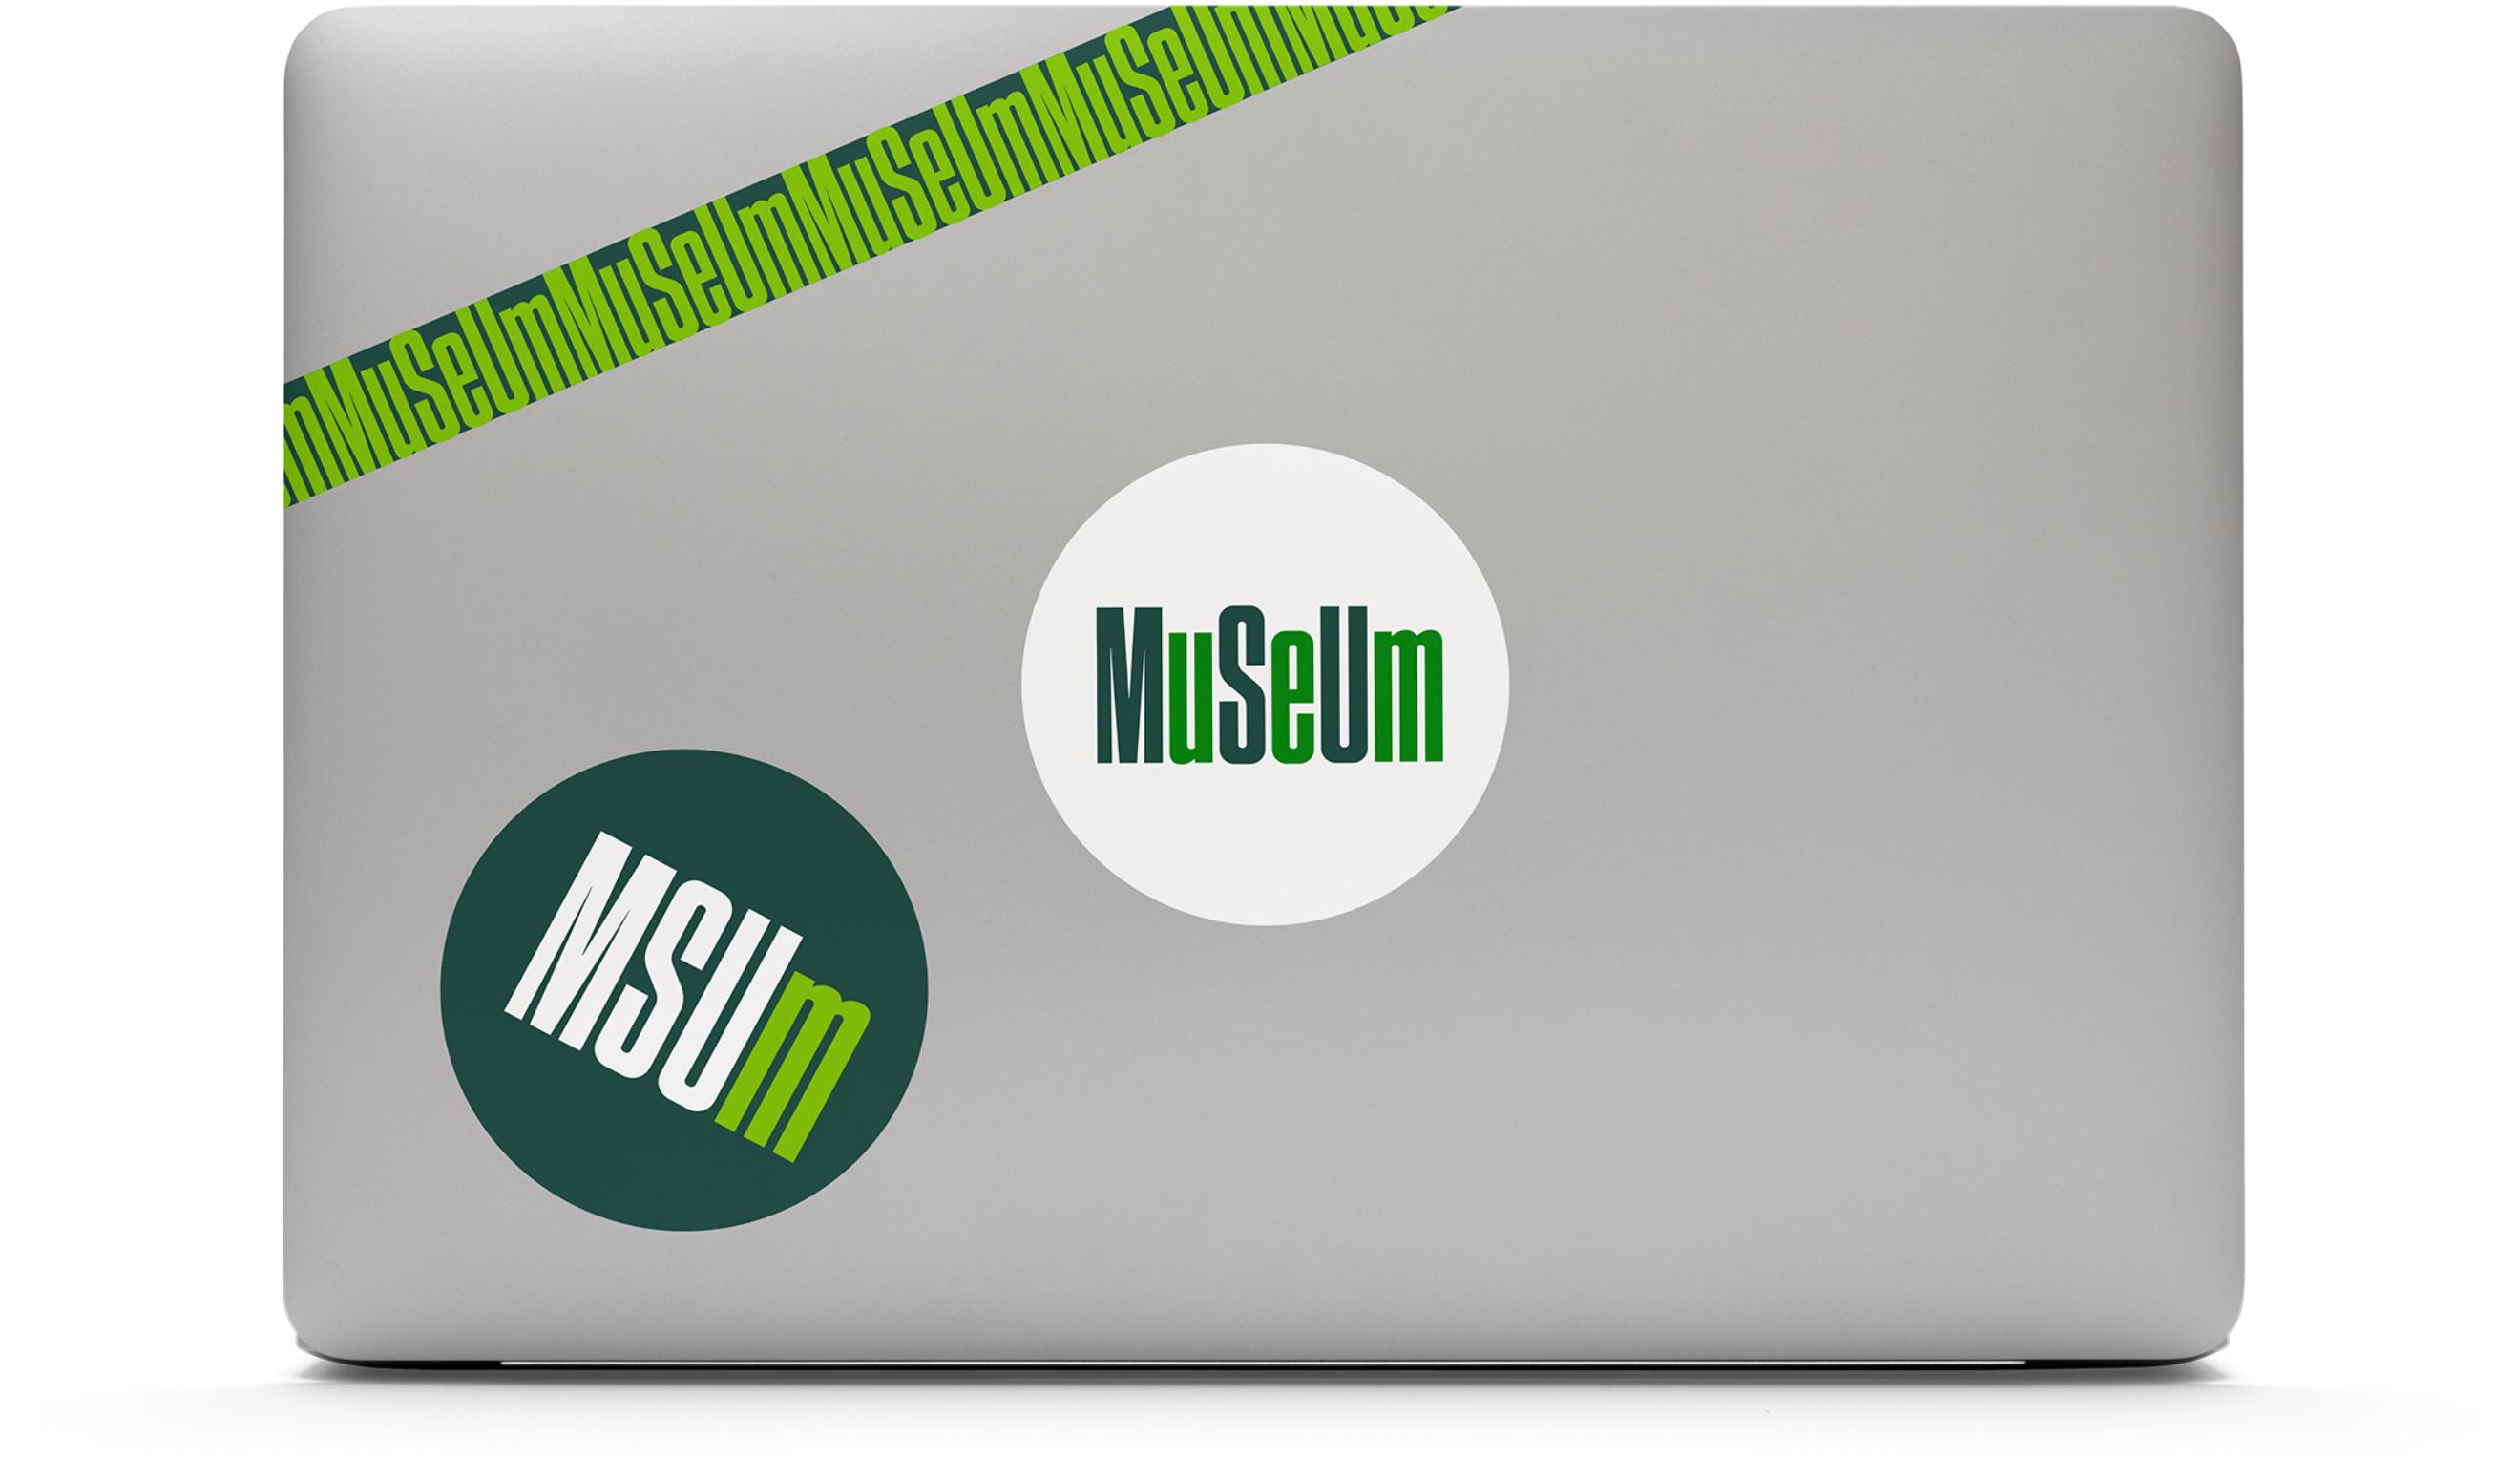 MSU Museum logo branded stickers on a opened laptop cover